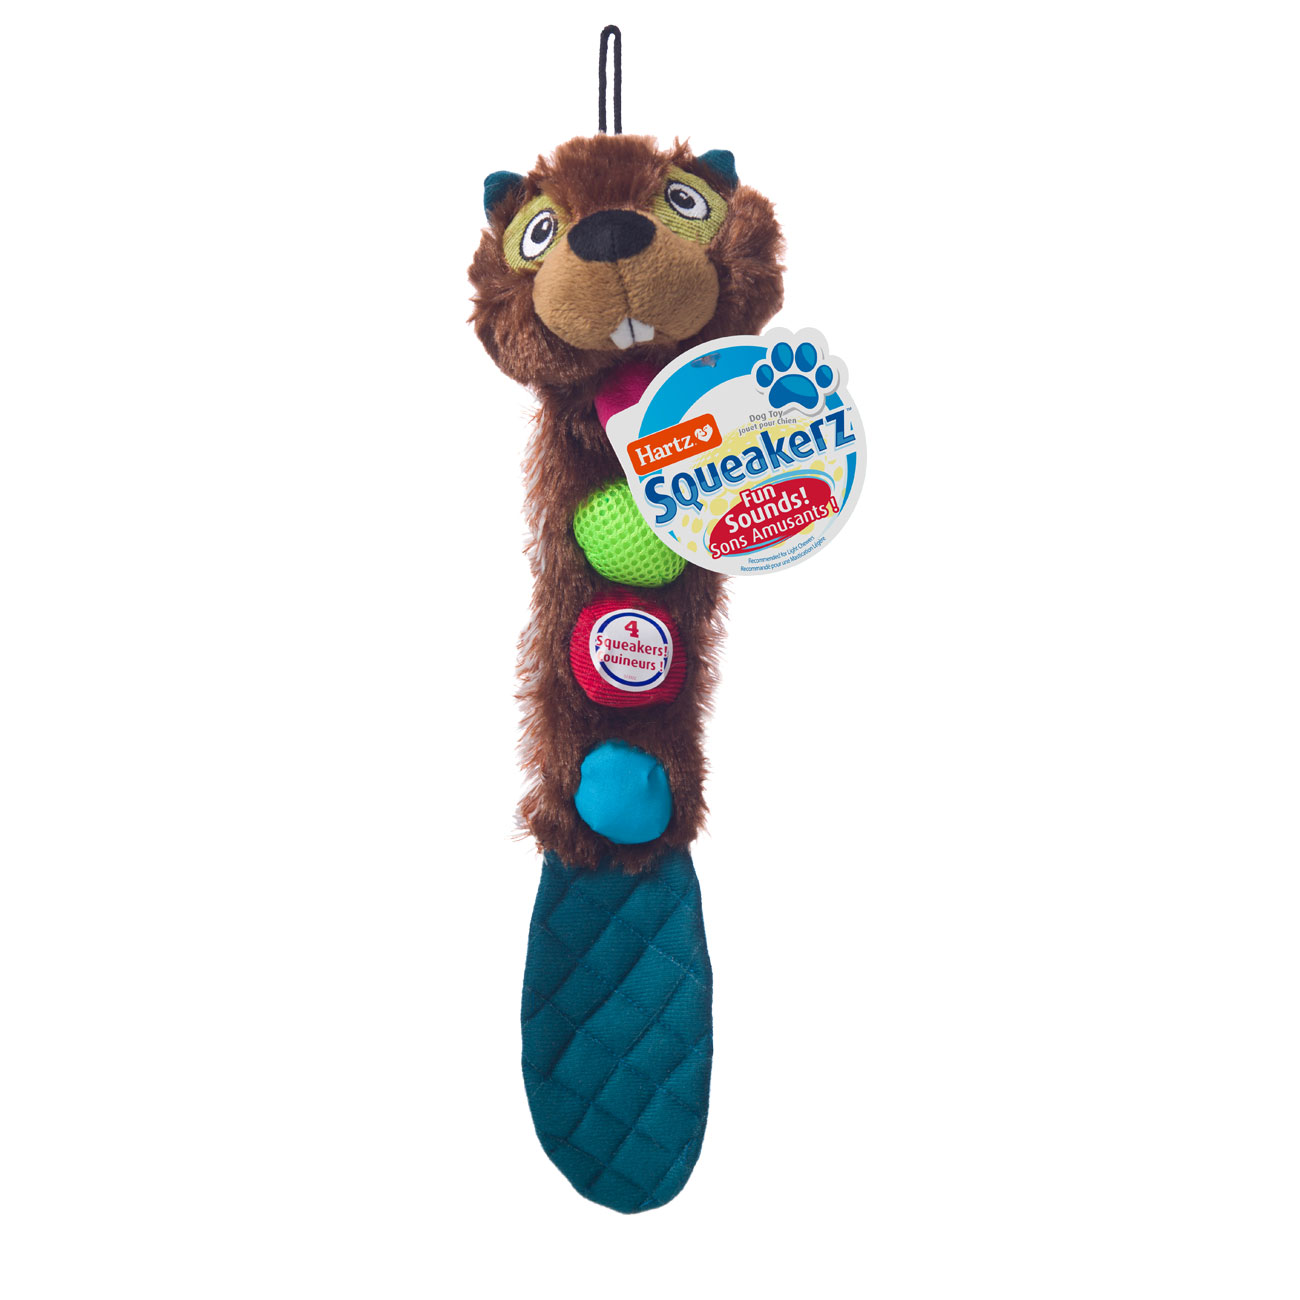 Best Interactive Dog Toys To Keep Your Pet Busy - Wagging Right